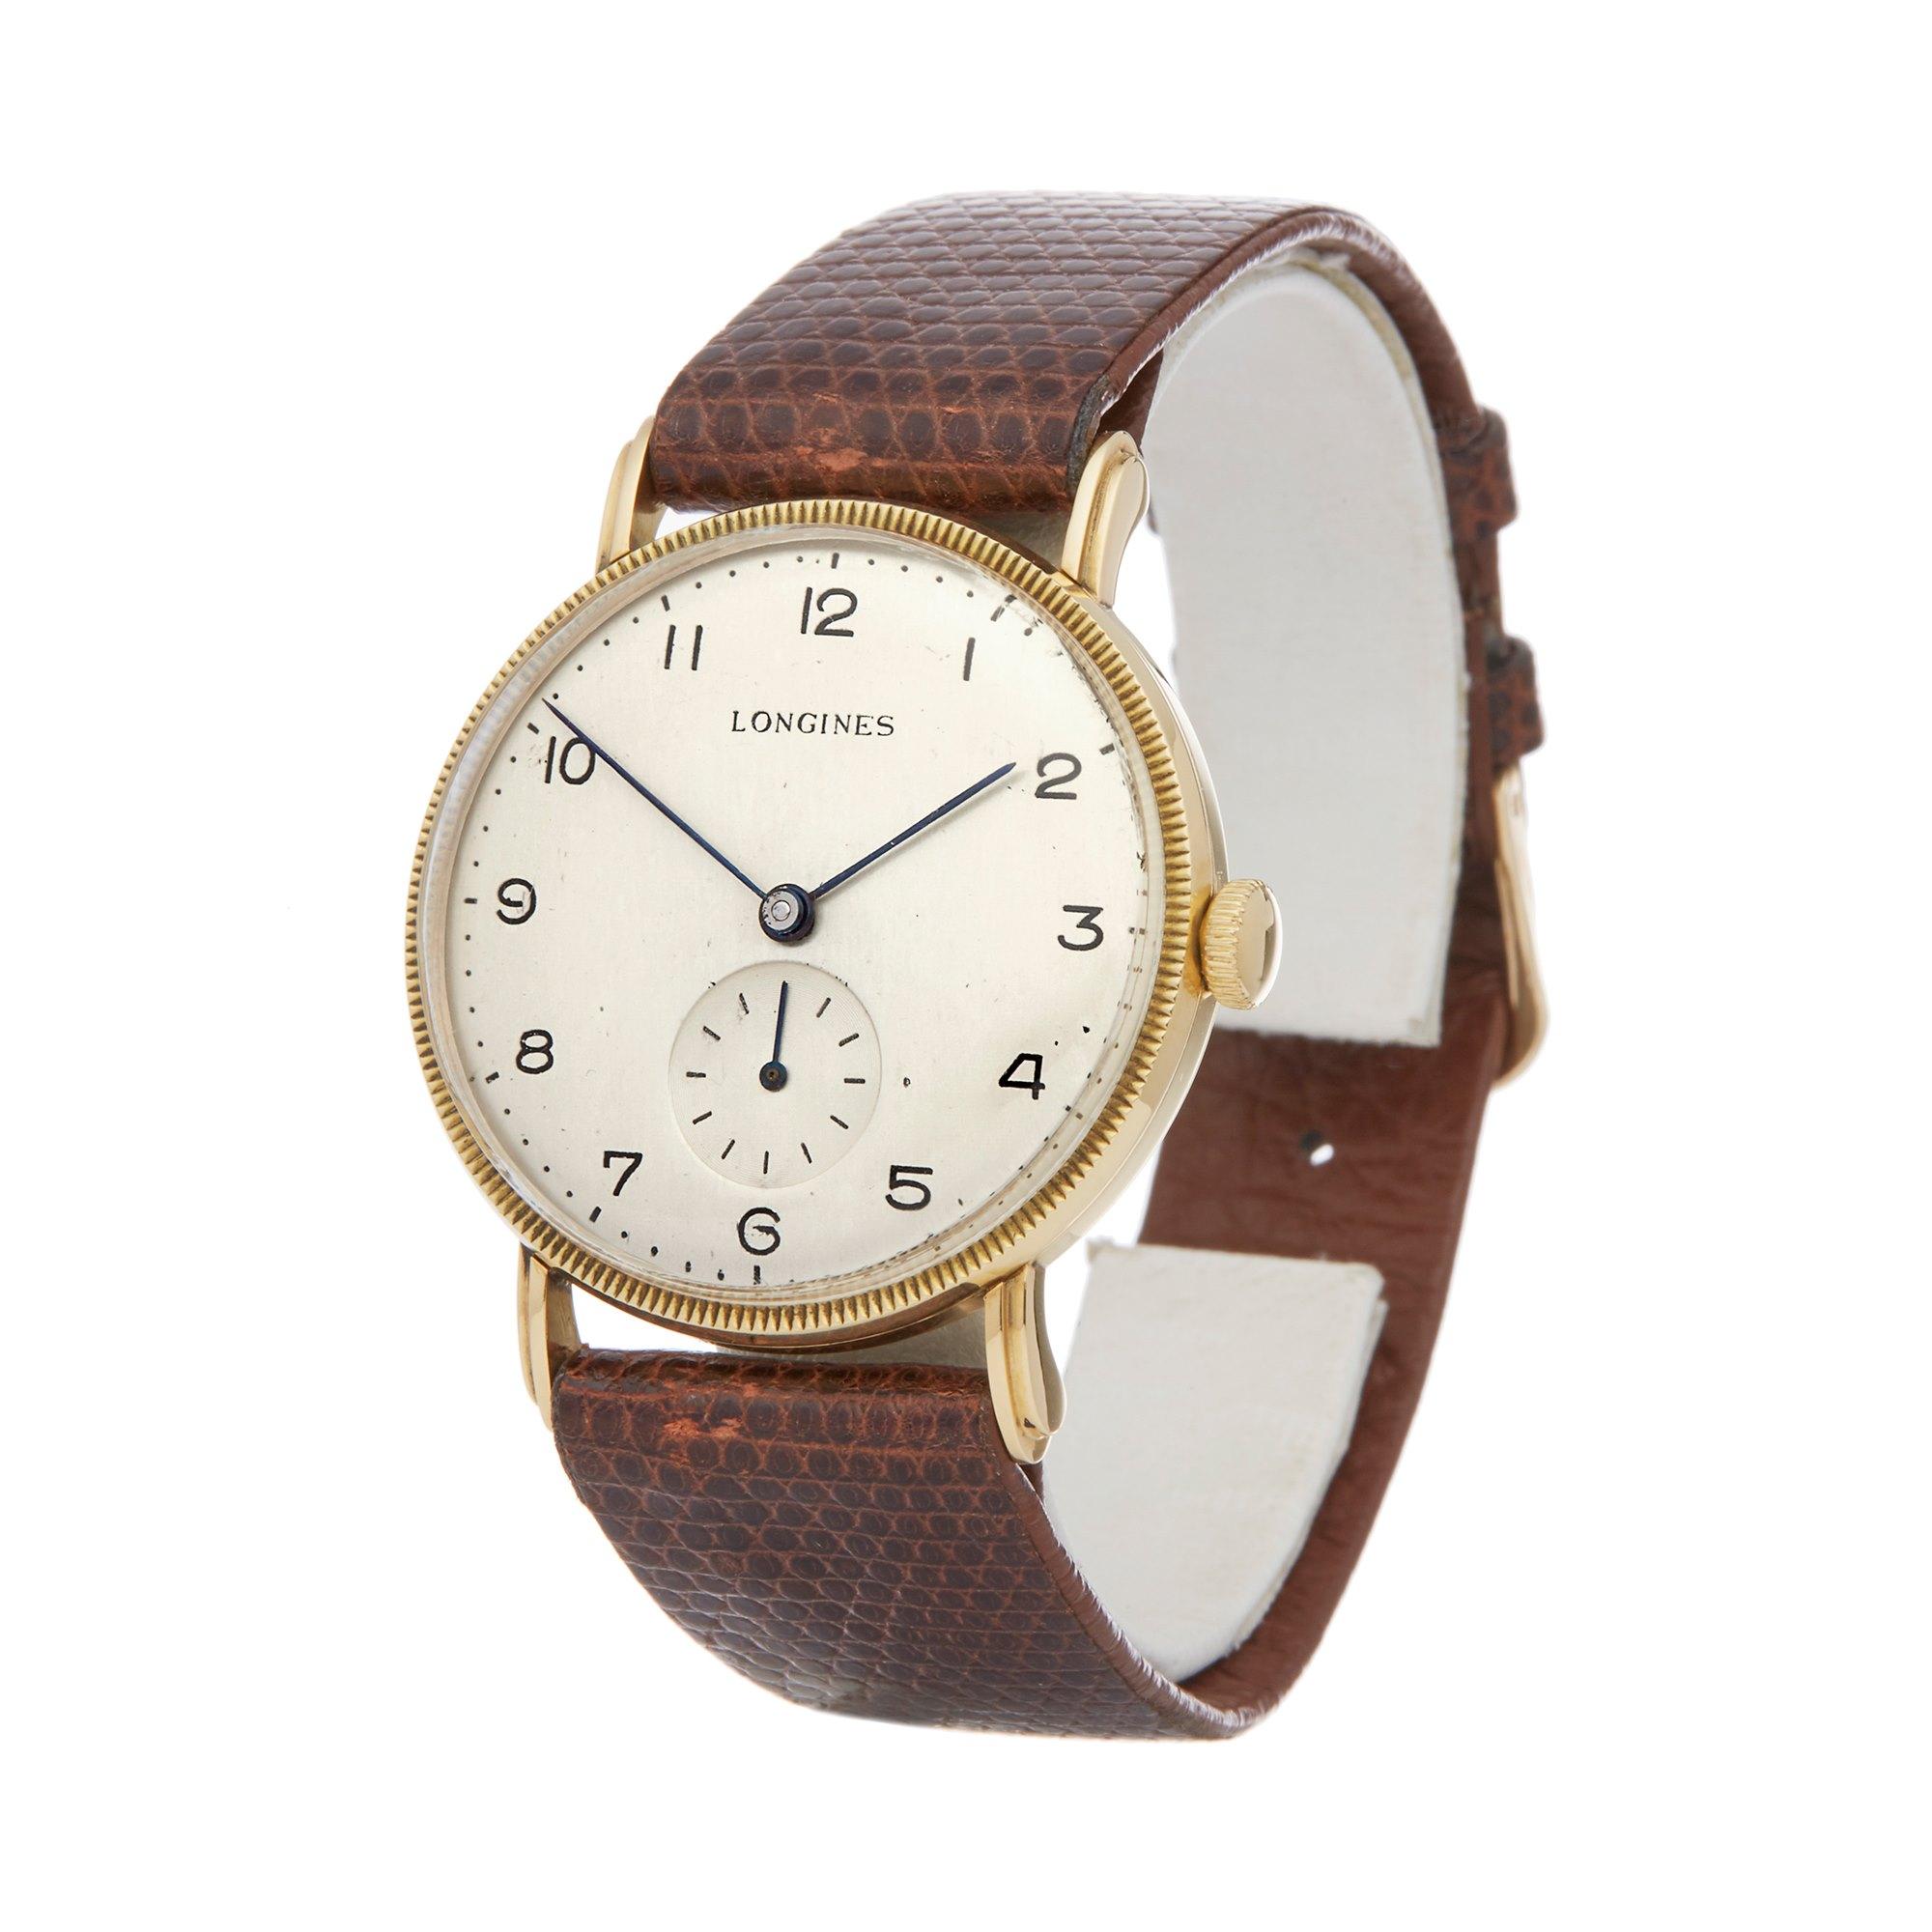 Xupes Reference: COM002406
Manufacturer: Longines
Model: Vintage
Model Variant: 
Model Number: 
Age: 1943
Gender: Men
Complete With: Longines Box 
Dial: Silver Arabic
Glass: Plexiglass
Case Material: Yellow Gold
Strap Material: Brown Lizard